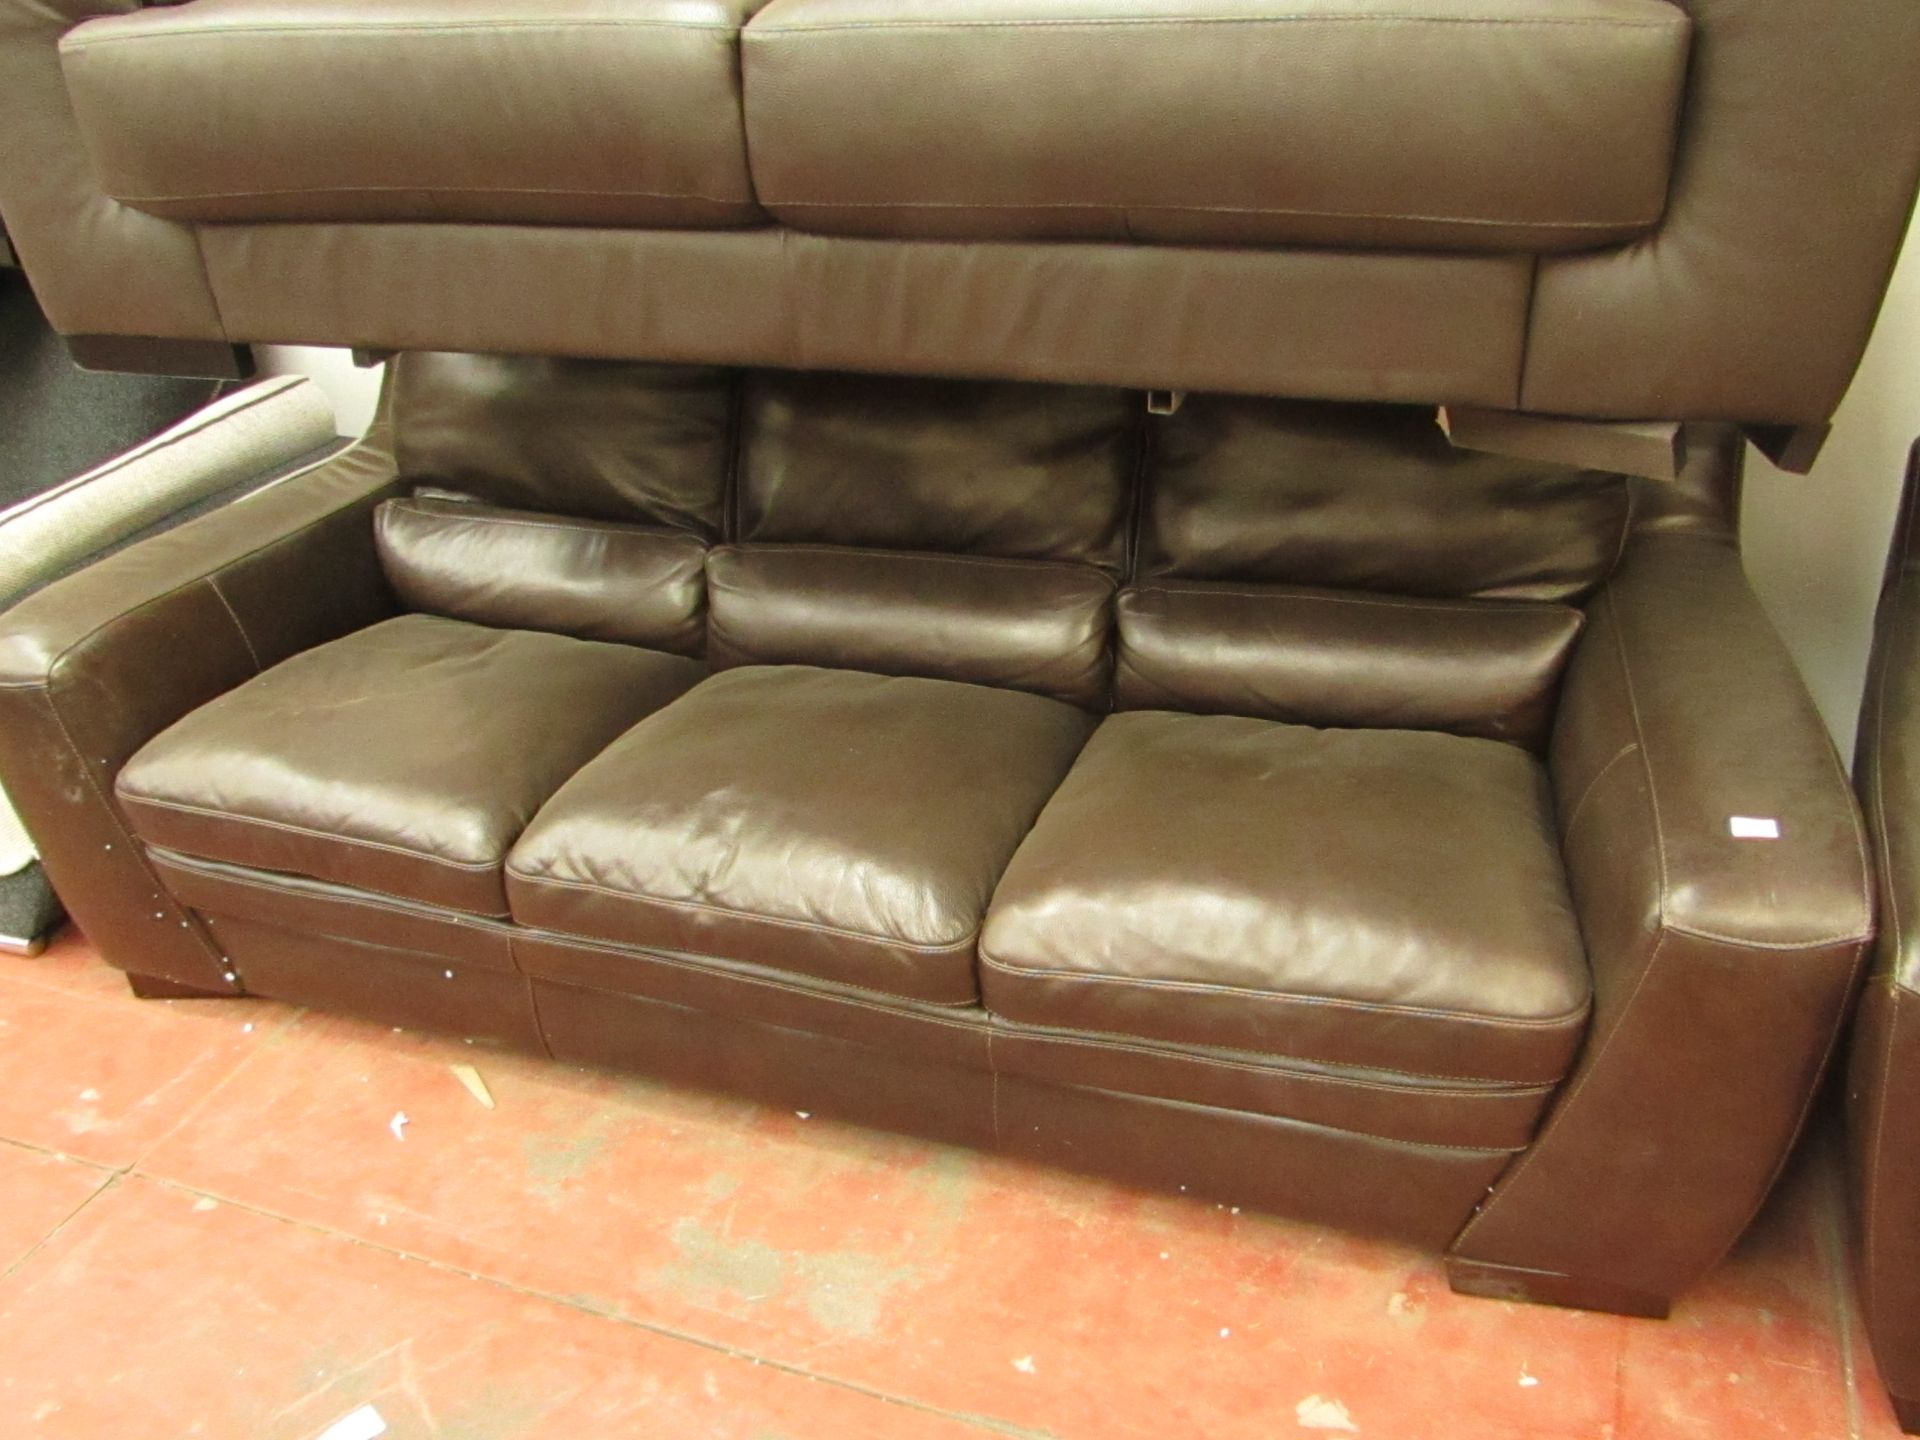 Brown leather 3 seater sofa with no visible damage.